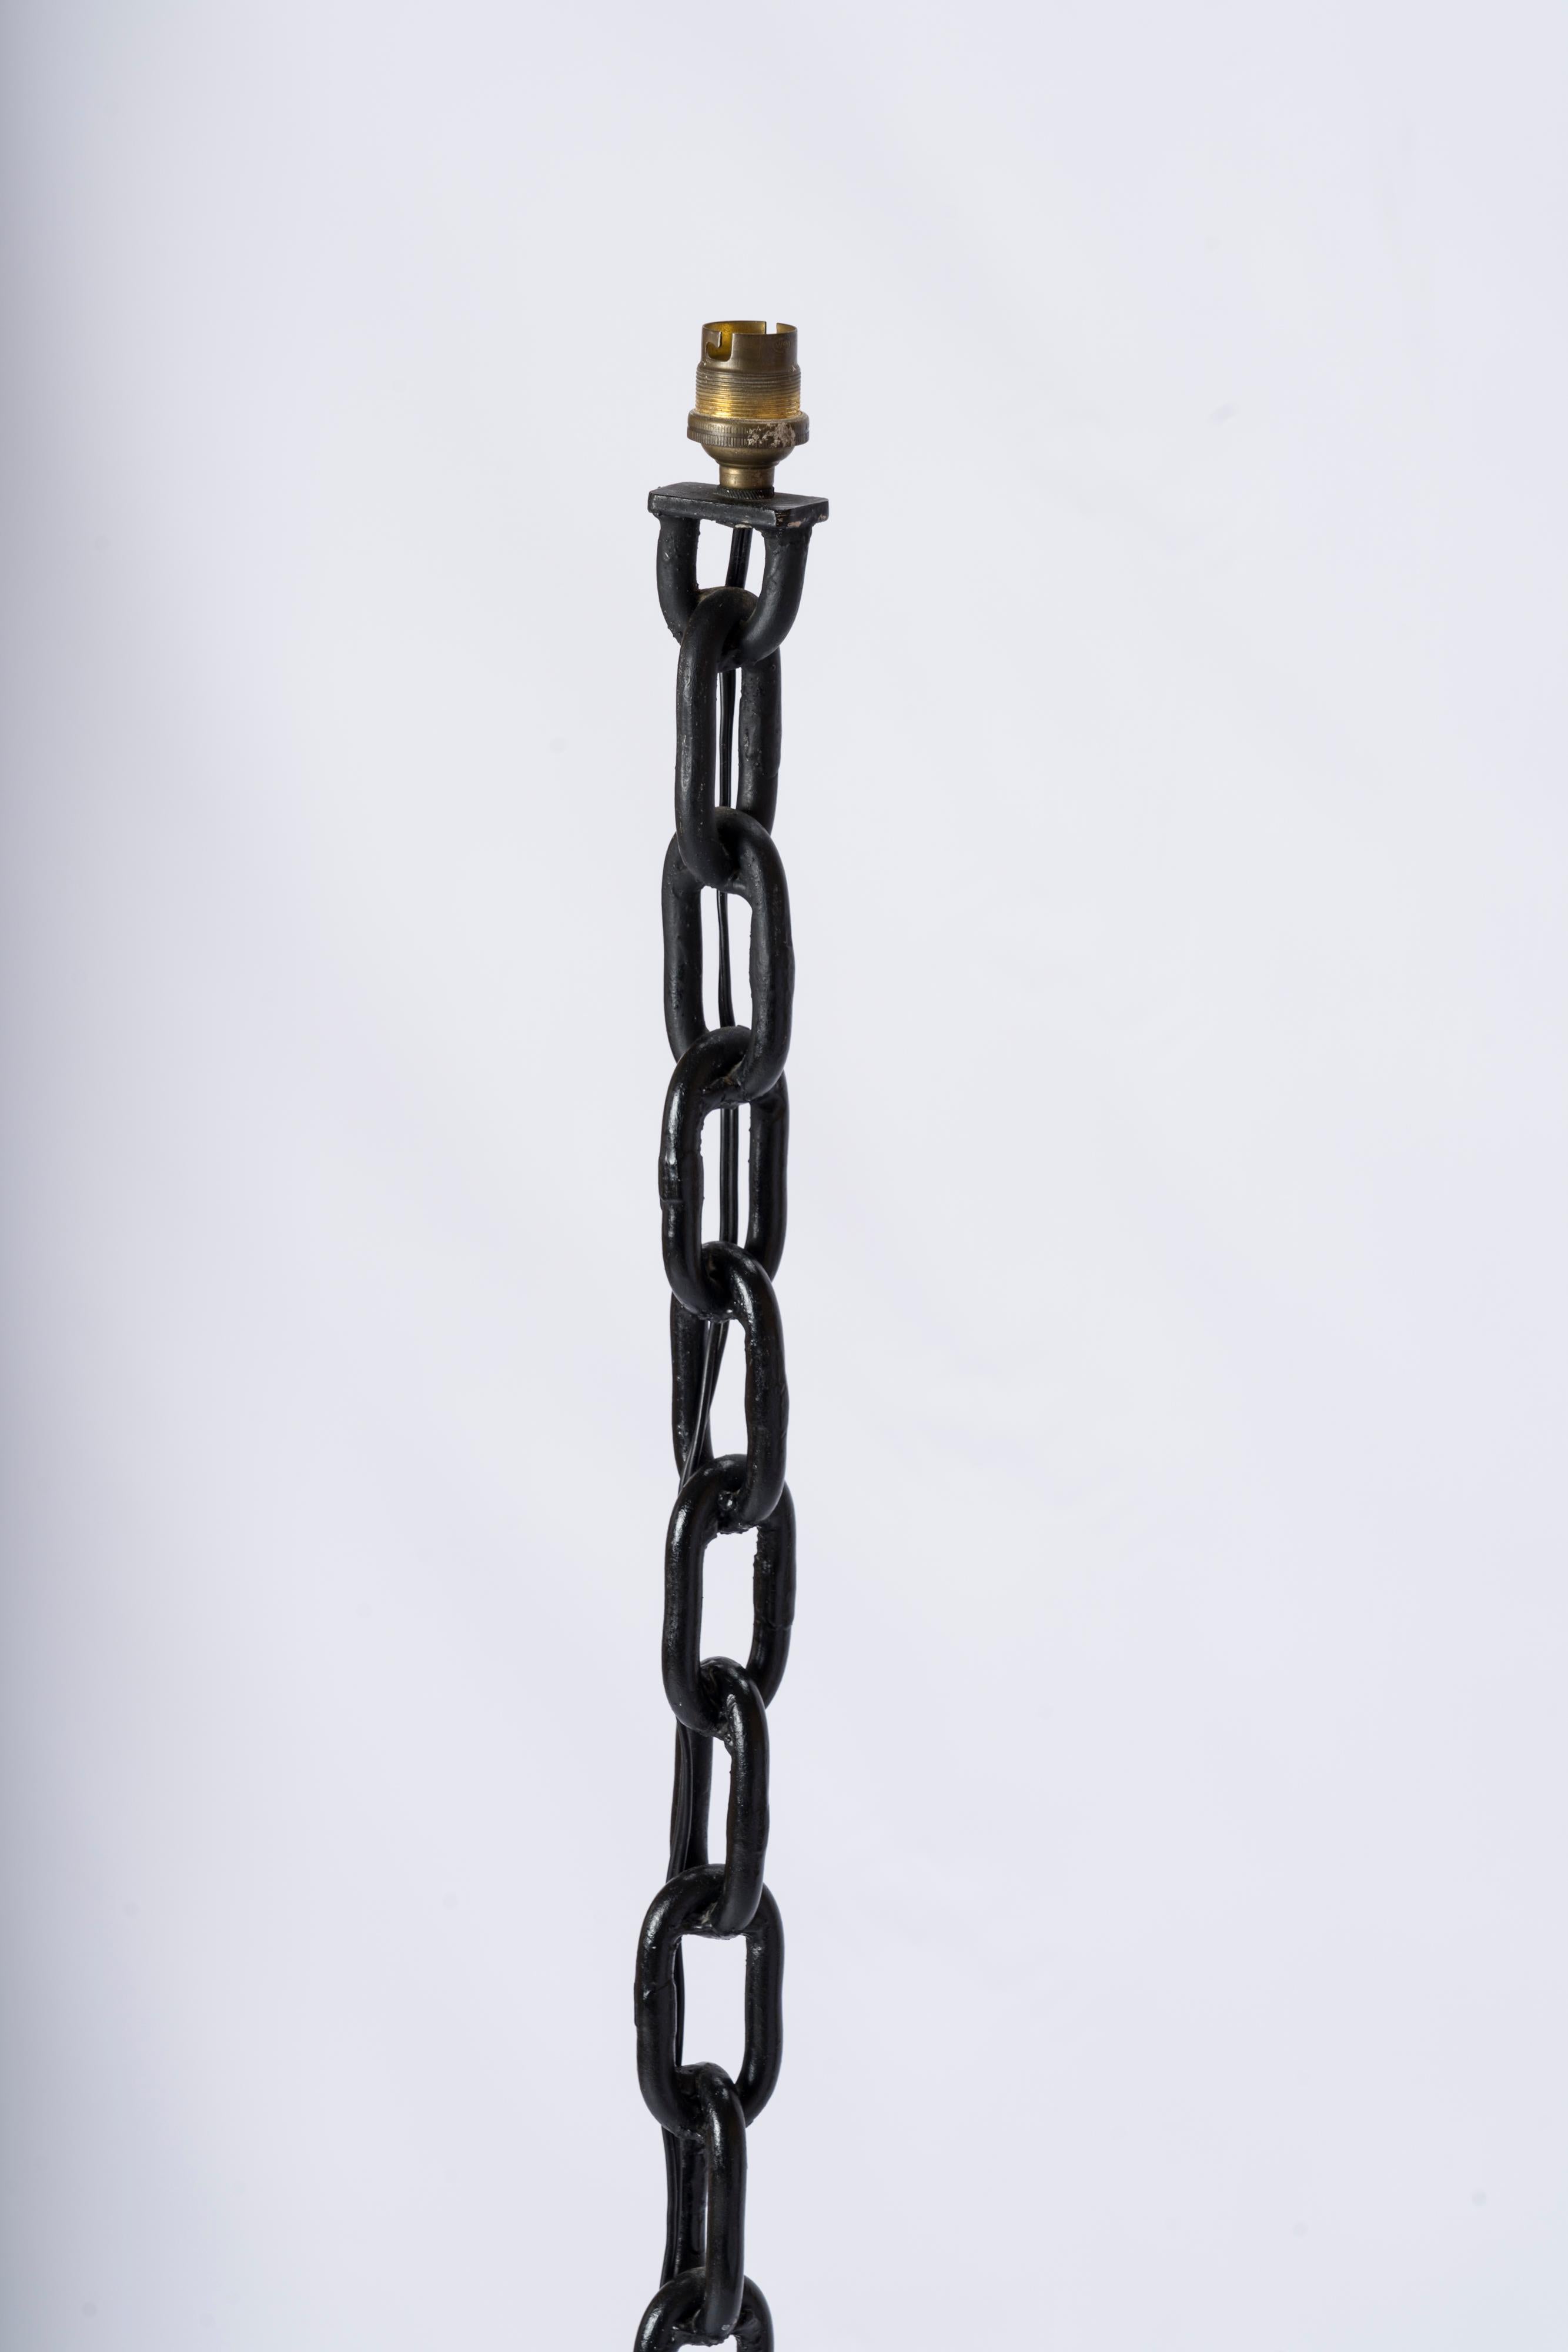 Brutalist Black Welded Chain Floor Lamp in style of Franz West - France 1970s  In Fair Condition For Sale In New York, NY